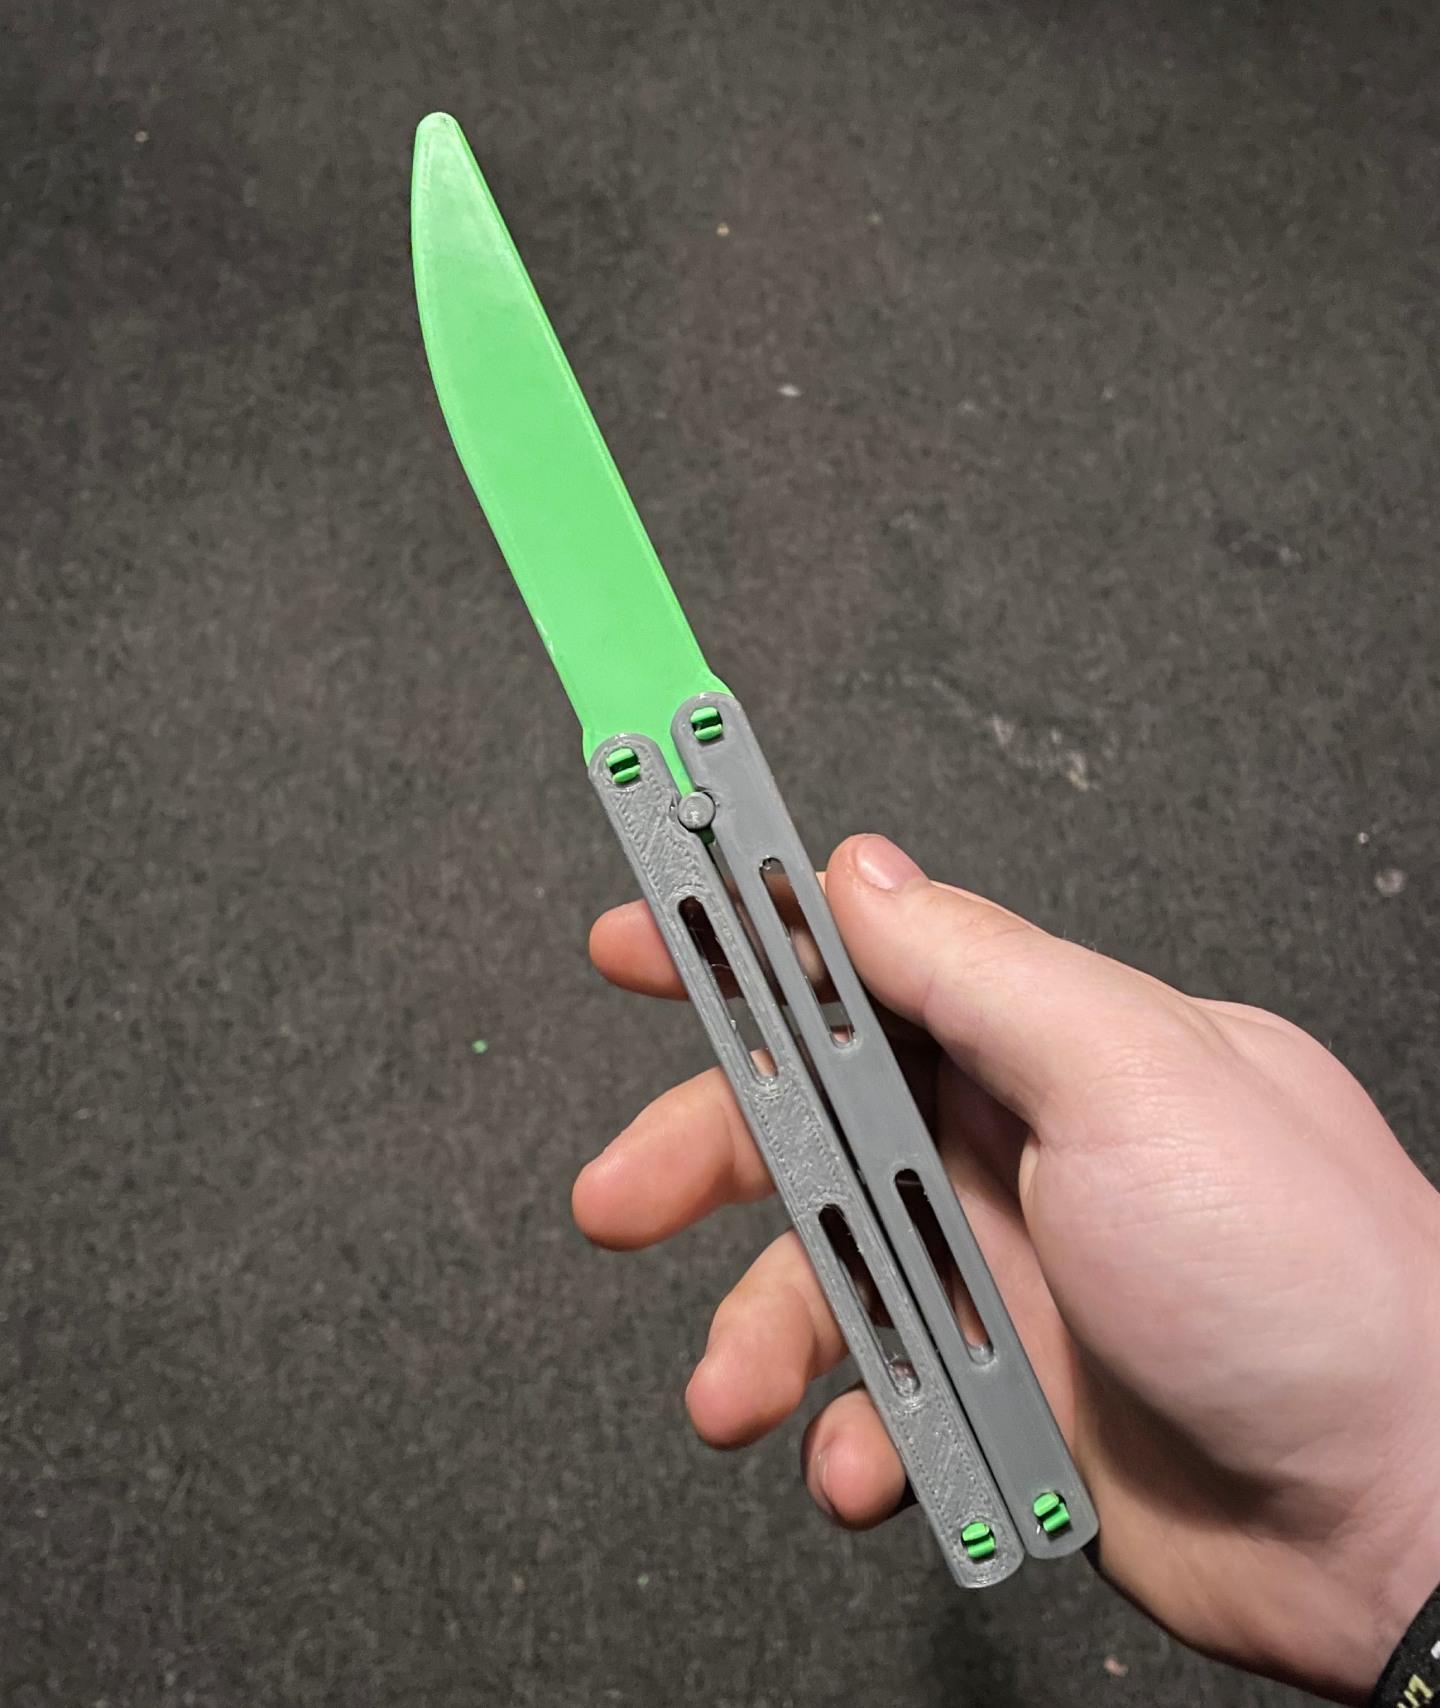 butterfly knife balisong trainer remix 3d model